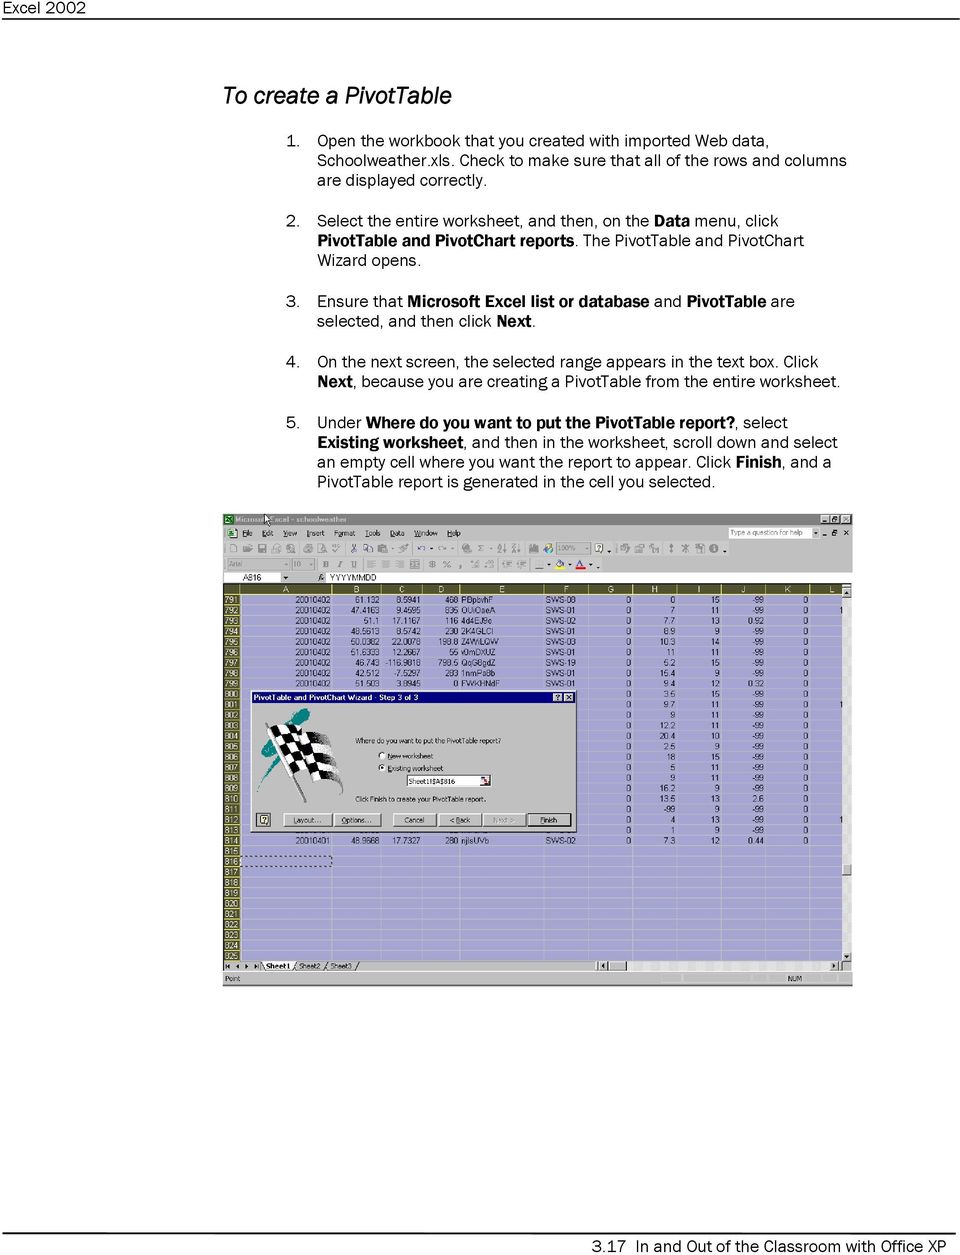 Ensure that Microsoft Excel list or database and PivotTable are selected, and then click Next. 4. On the next screen, the selected range appears in the text box.